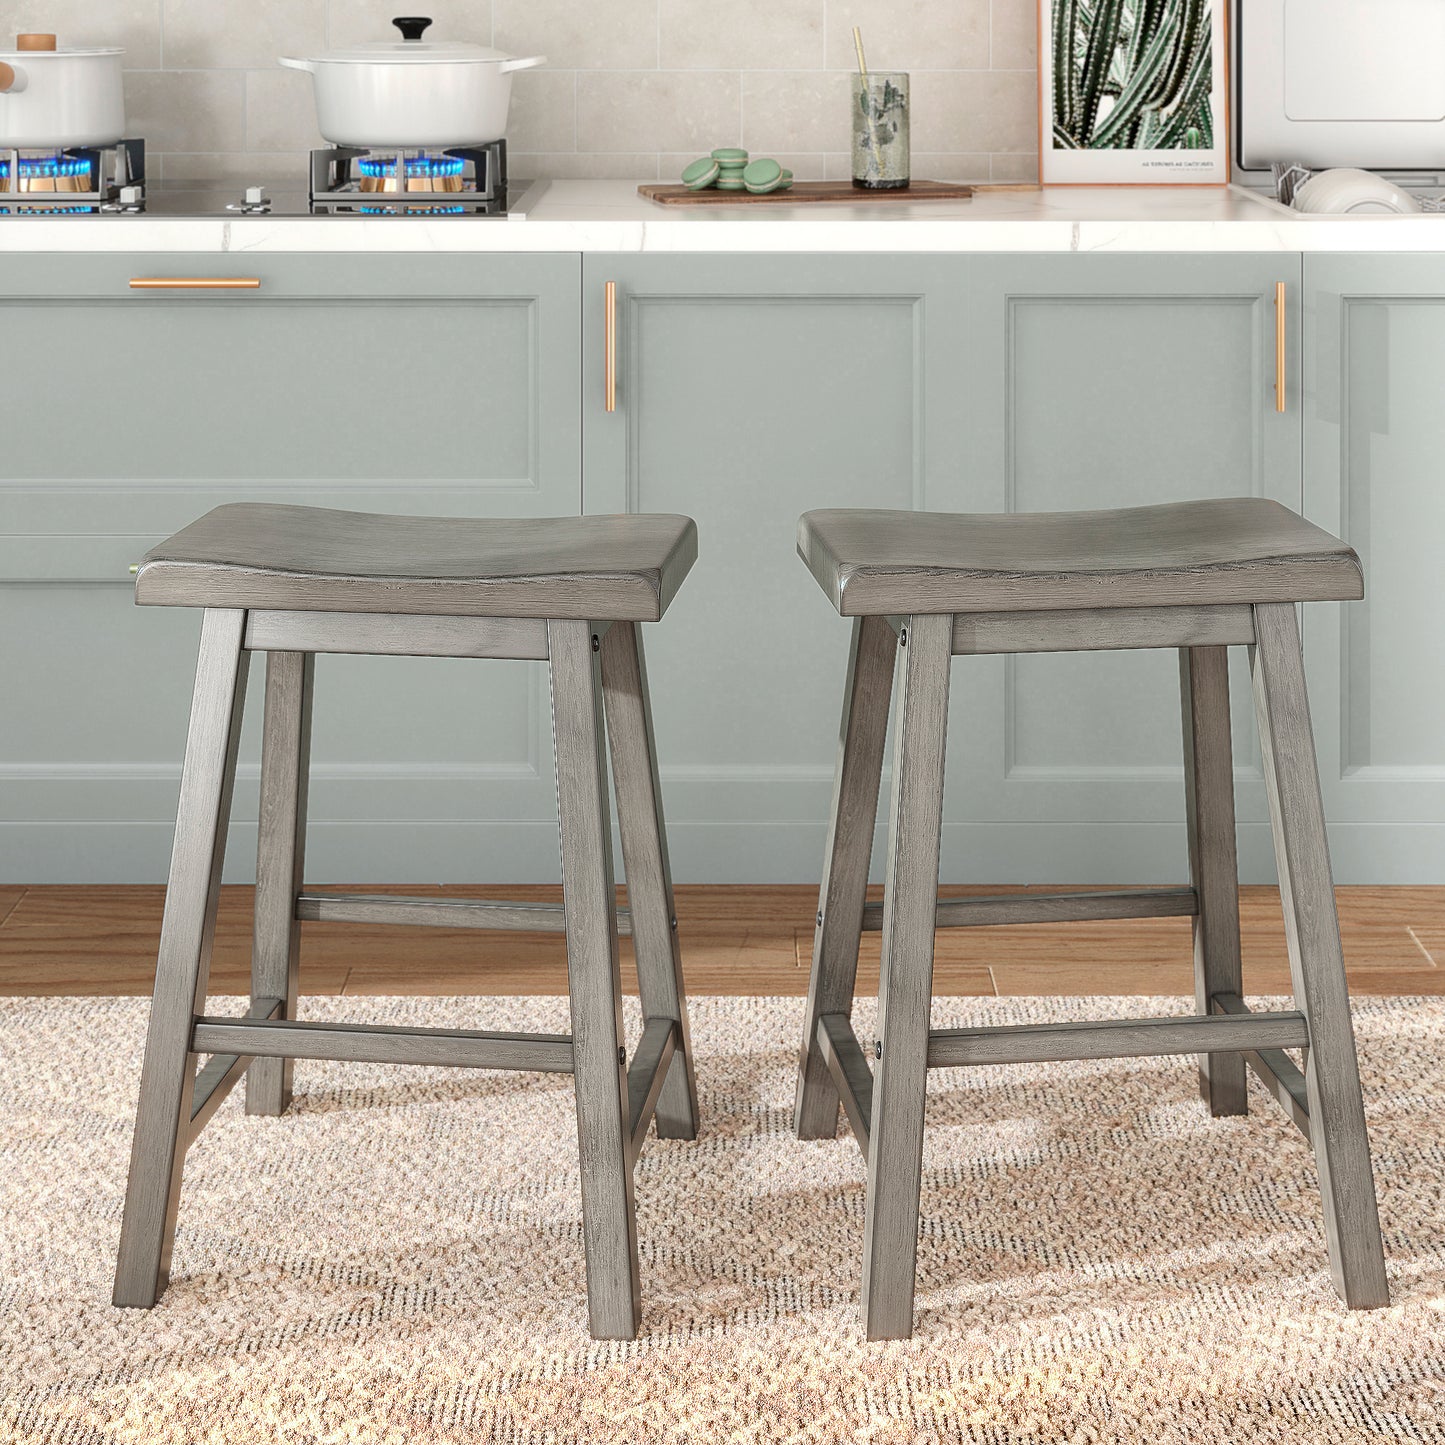 Saddle Seat Counter Height Backless Stools (Set of 2) - Antique Grey Finish